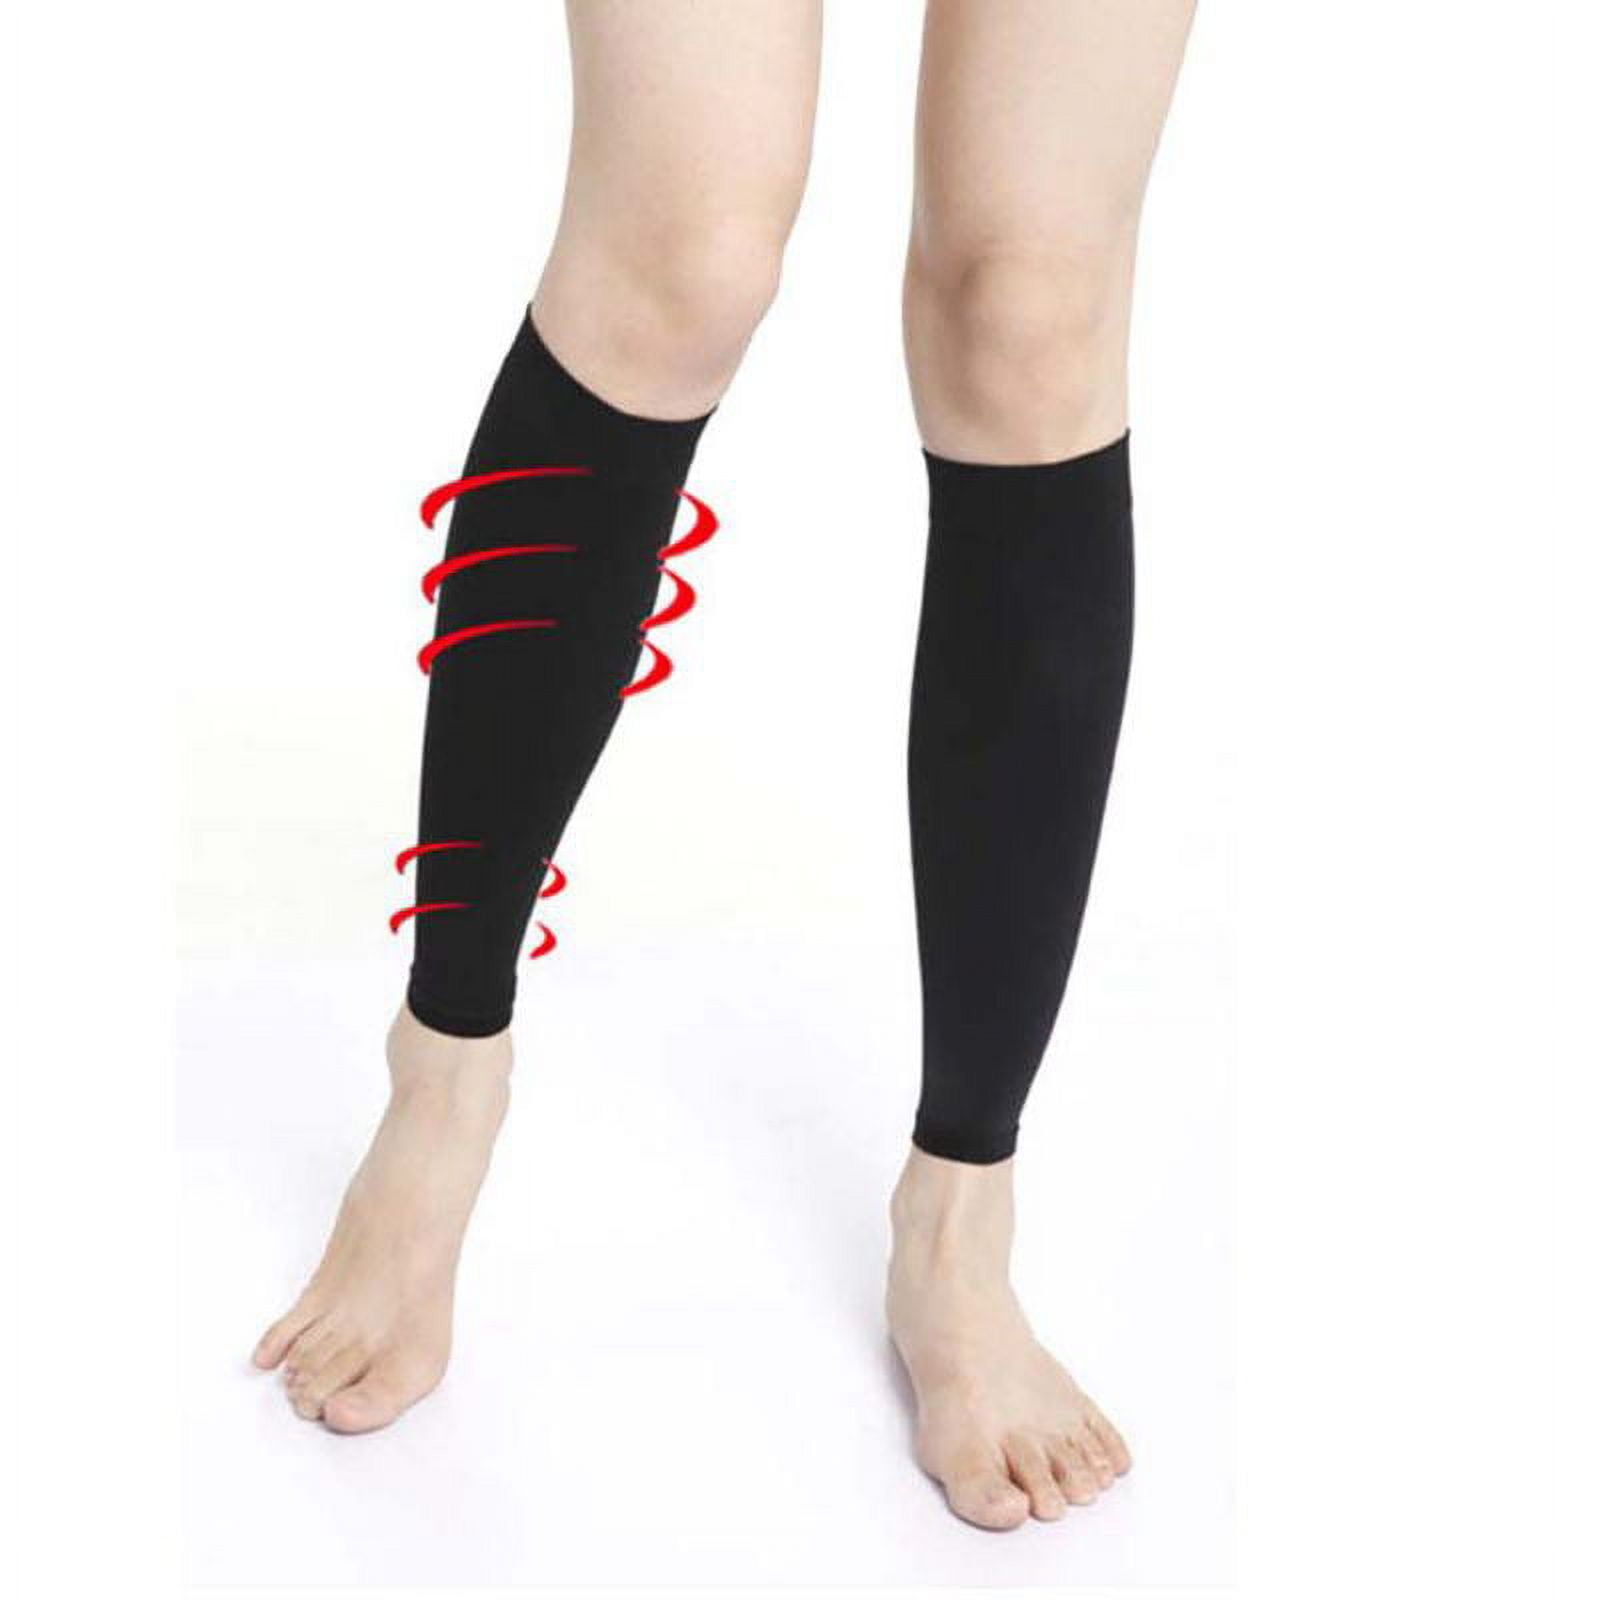 Calf Compression Sleeves for Men and Women - Copper Compression Calves  Support for Football, Running, Sports. Increase Blood Flow. Reduce Muscle  Fatigue. Improve Endurance. Aid Recovery. 